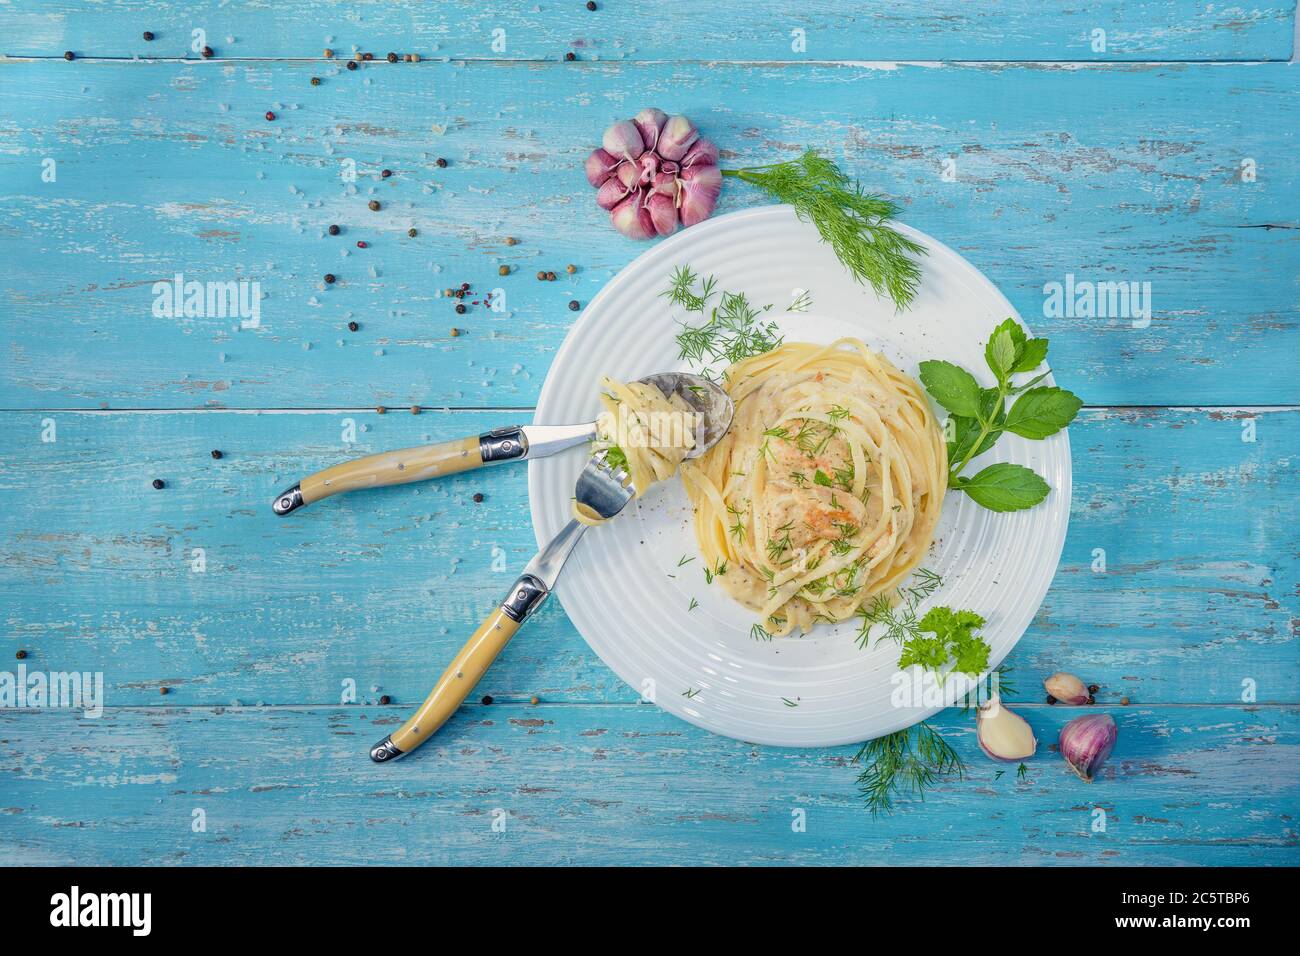 Dish standing on a blue wooden table, a plate with Italian pasta and chicken with a sauce of Provencal herbs, decorated with herbs, salt and garlic. Stock Photo